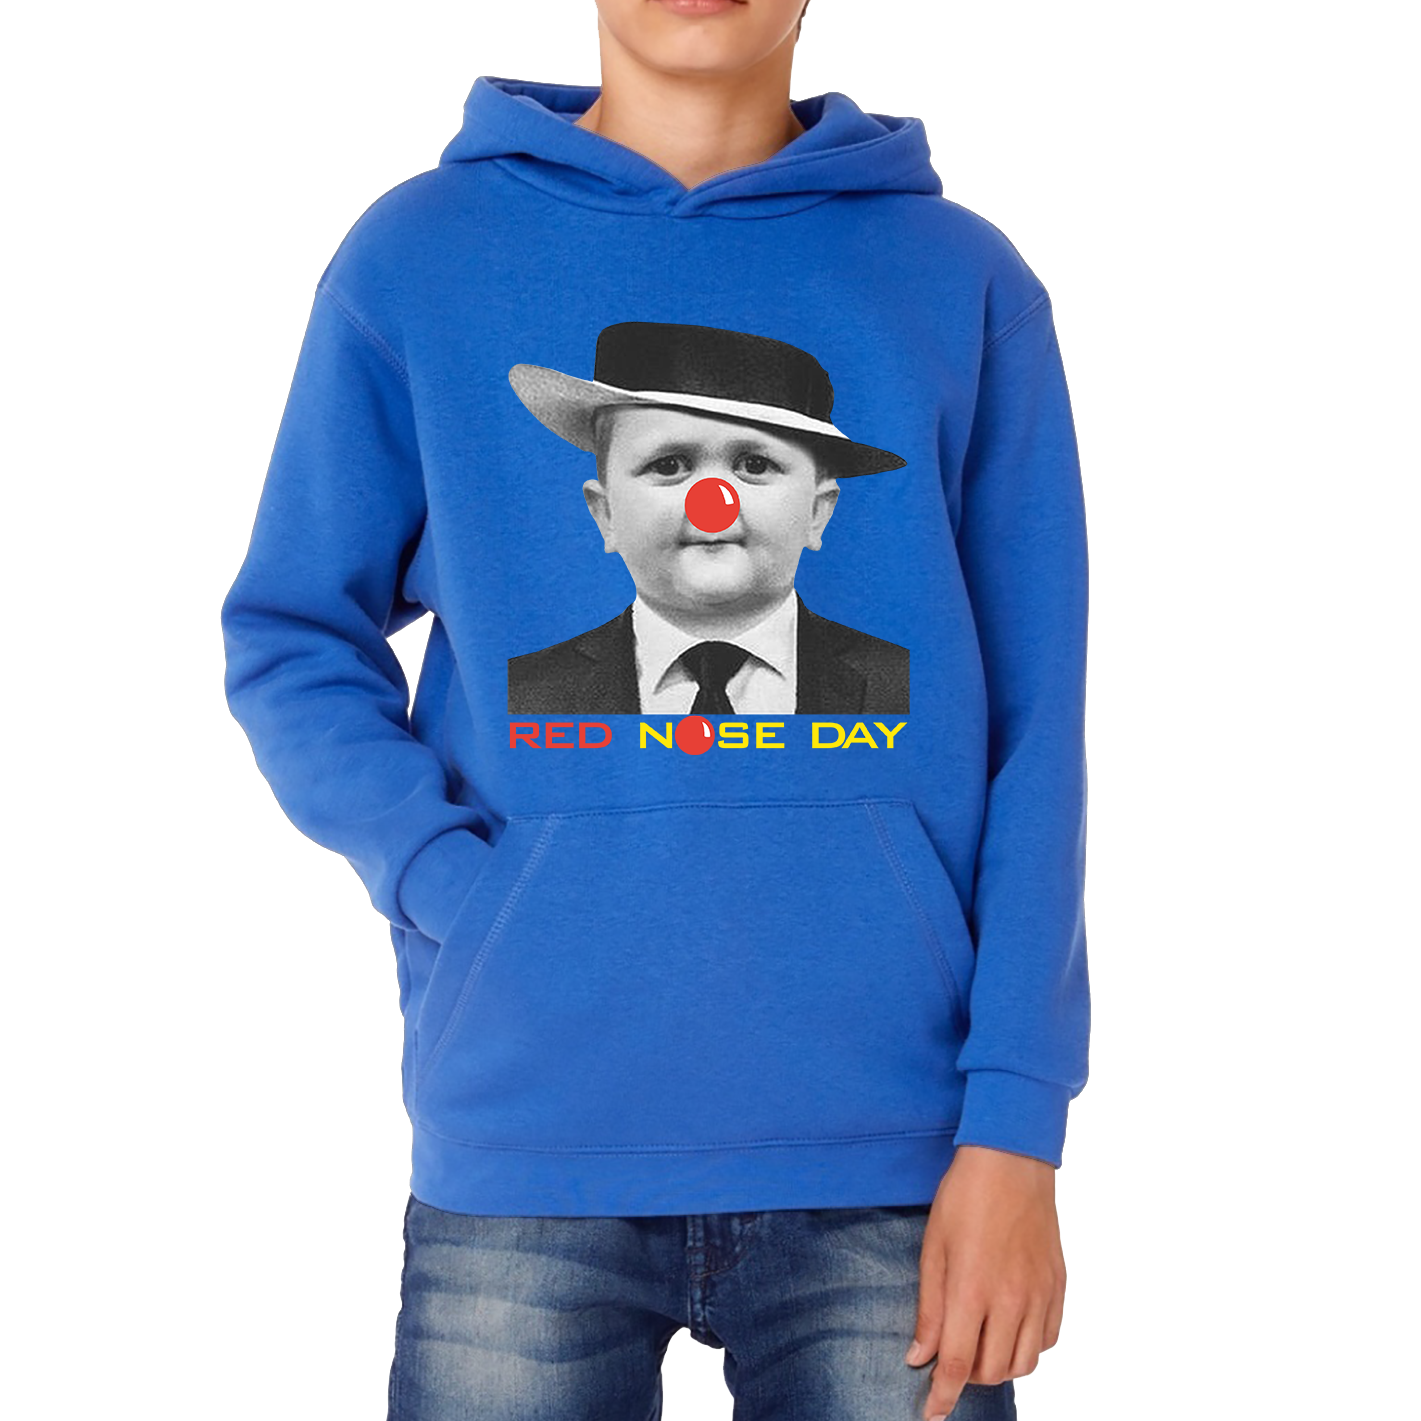 Hasbulla Magomedov MMA Fighter Red Nose Day Kids Hoodie. 50% Goes To Charity